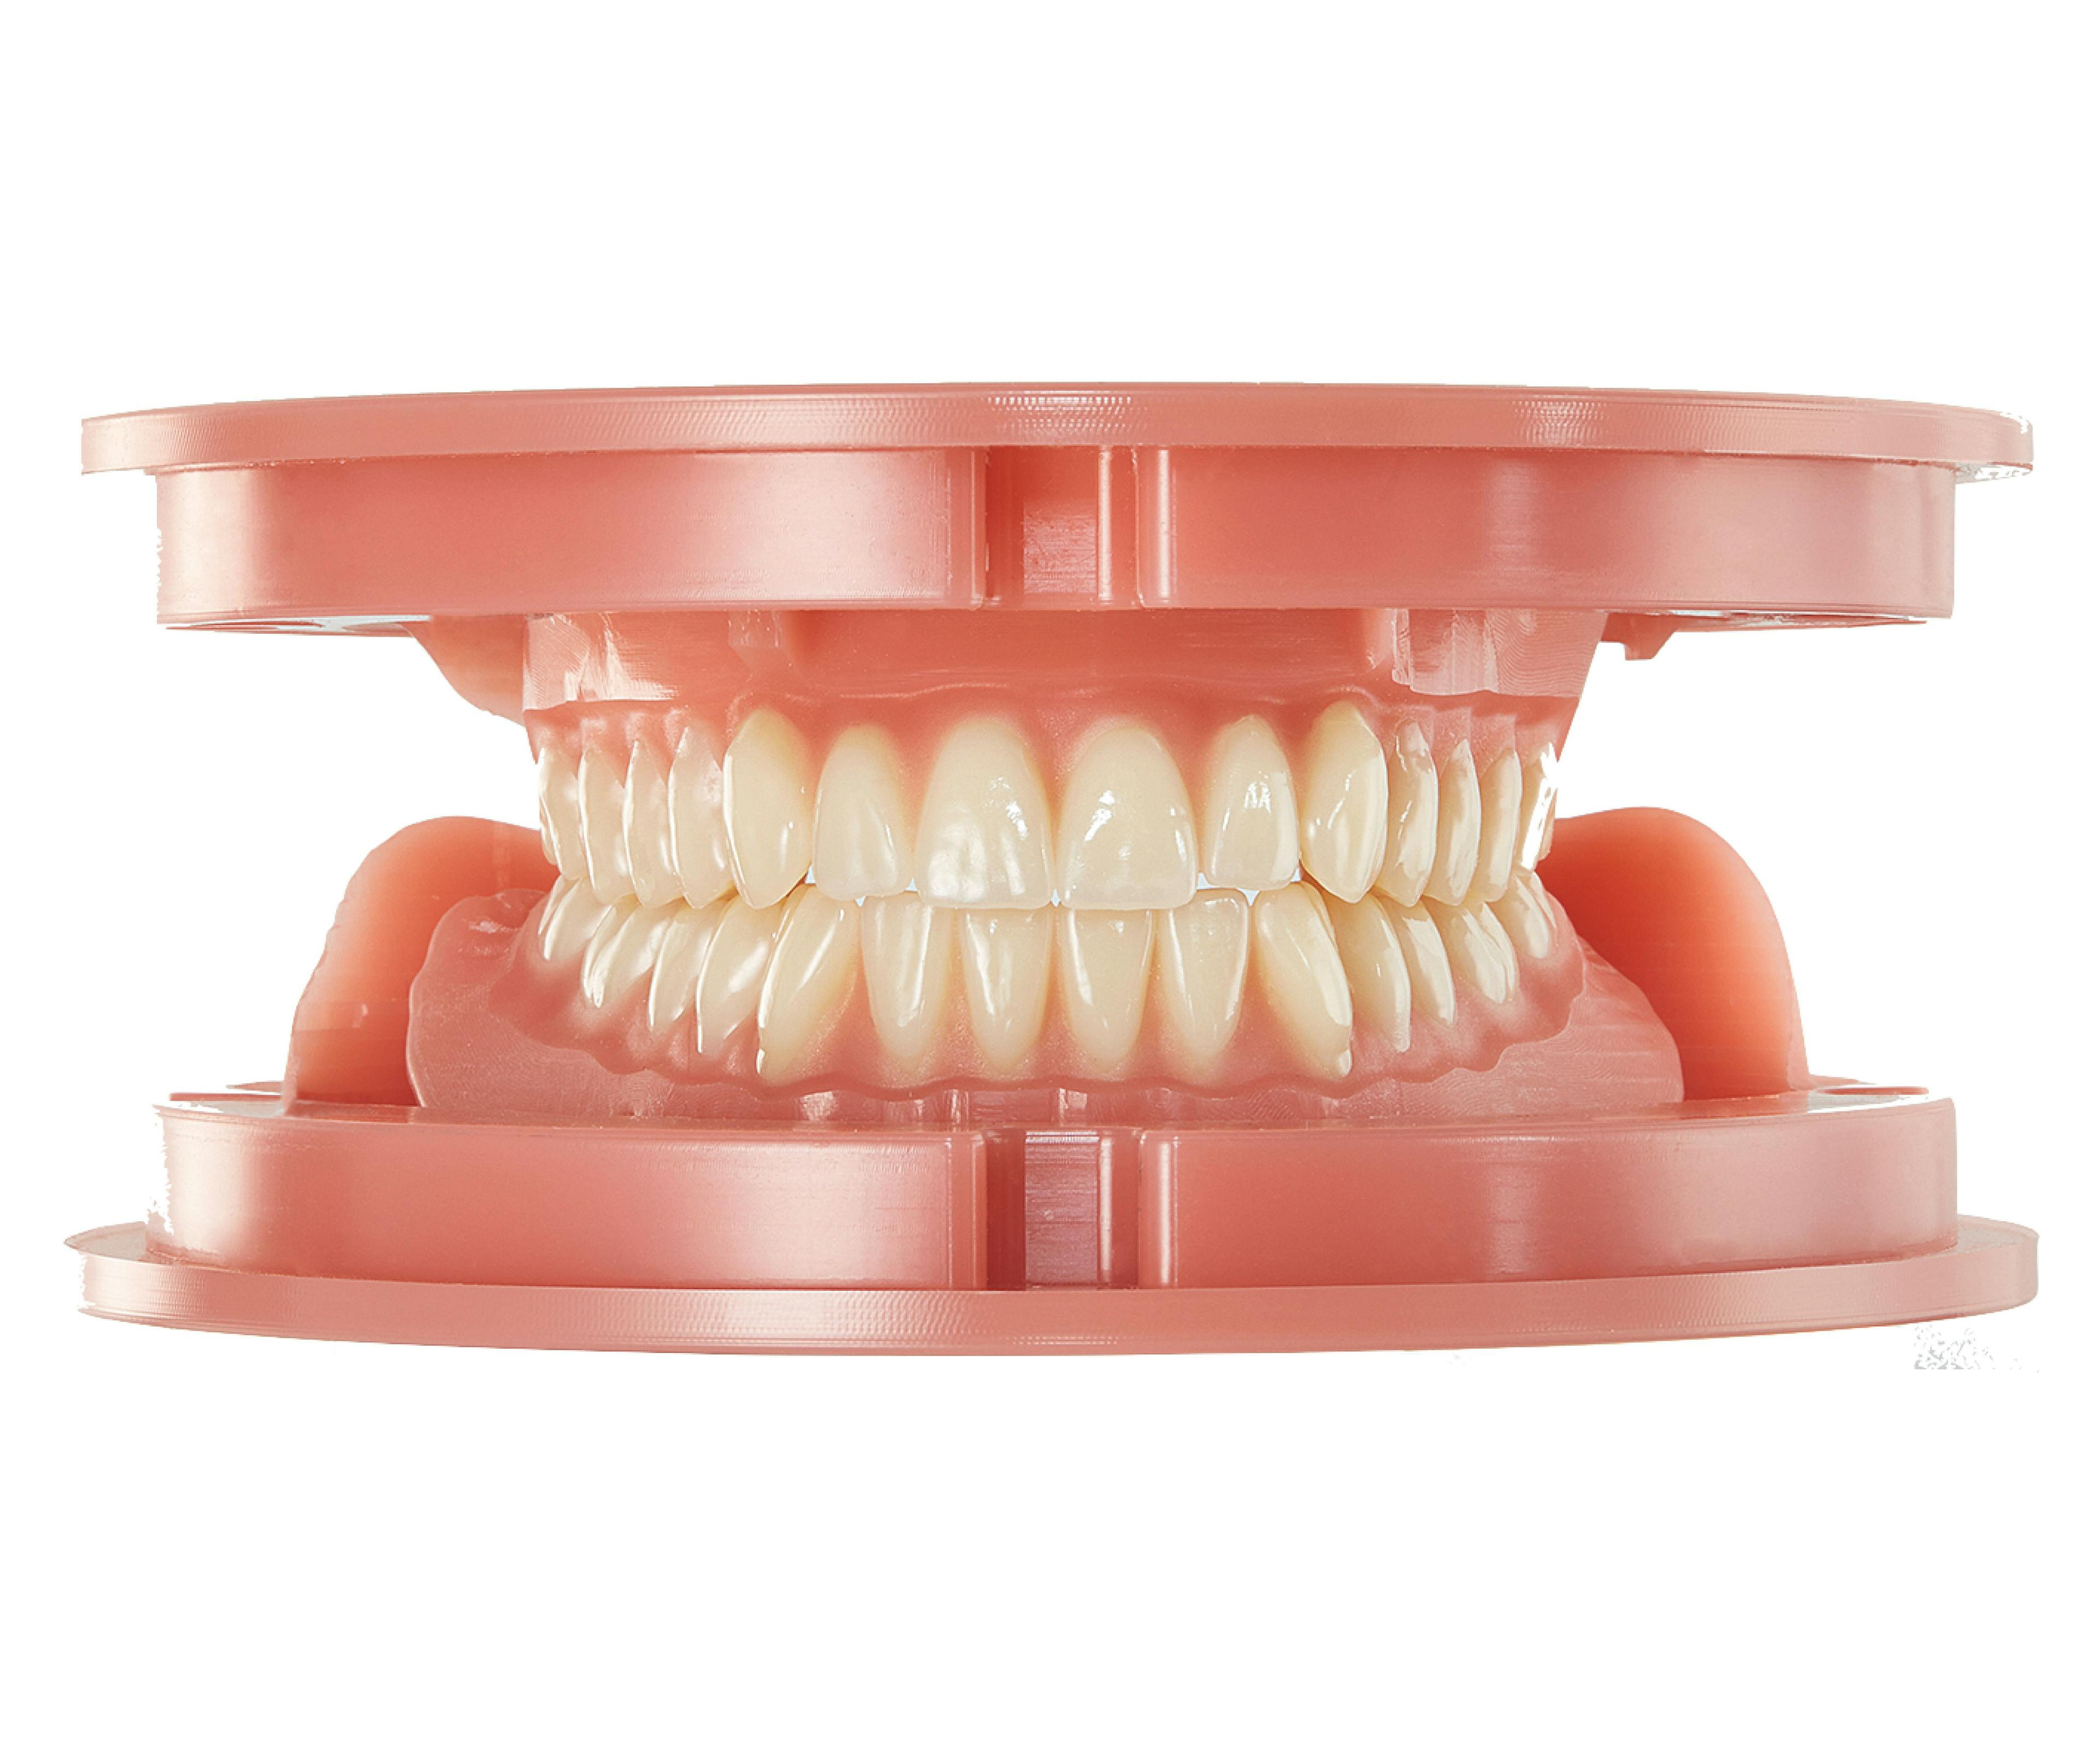 The BDLoad pucks feature preset teeth in centric occlusion.